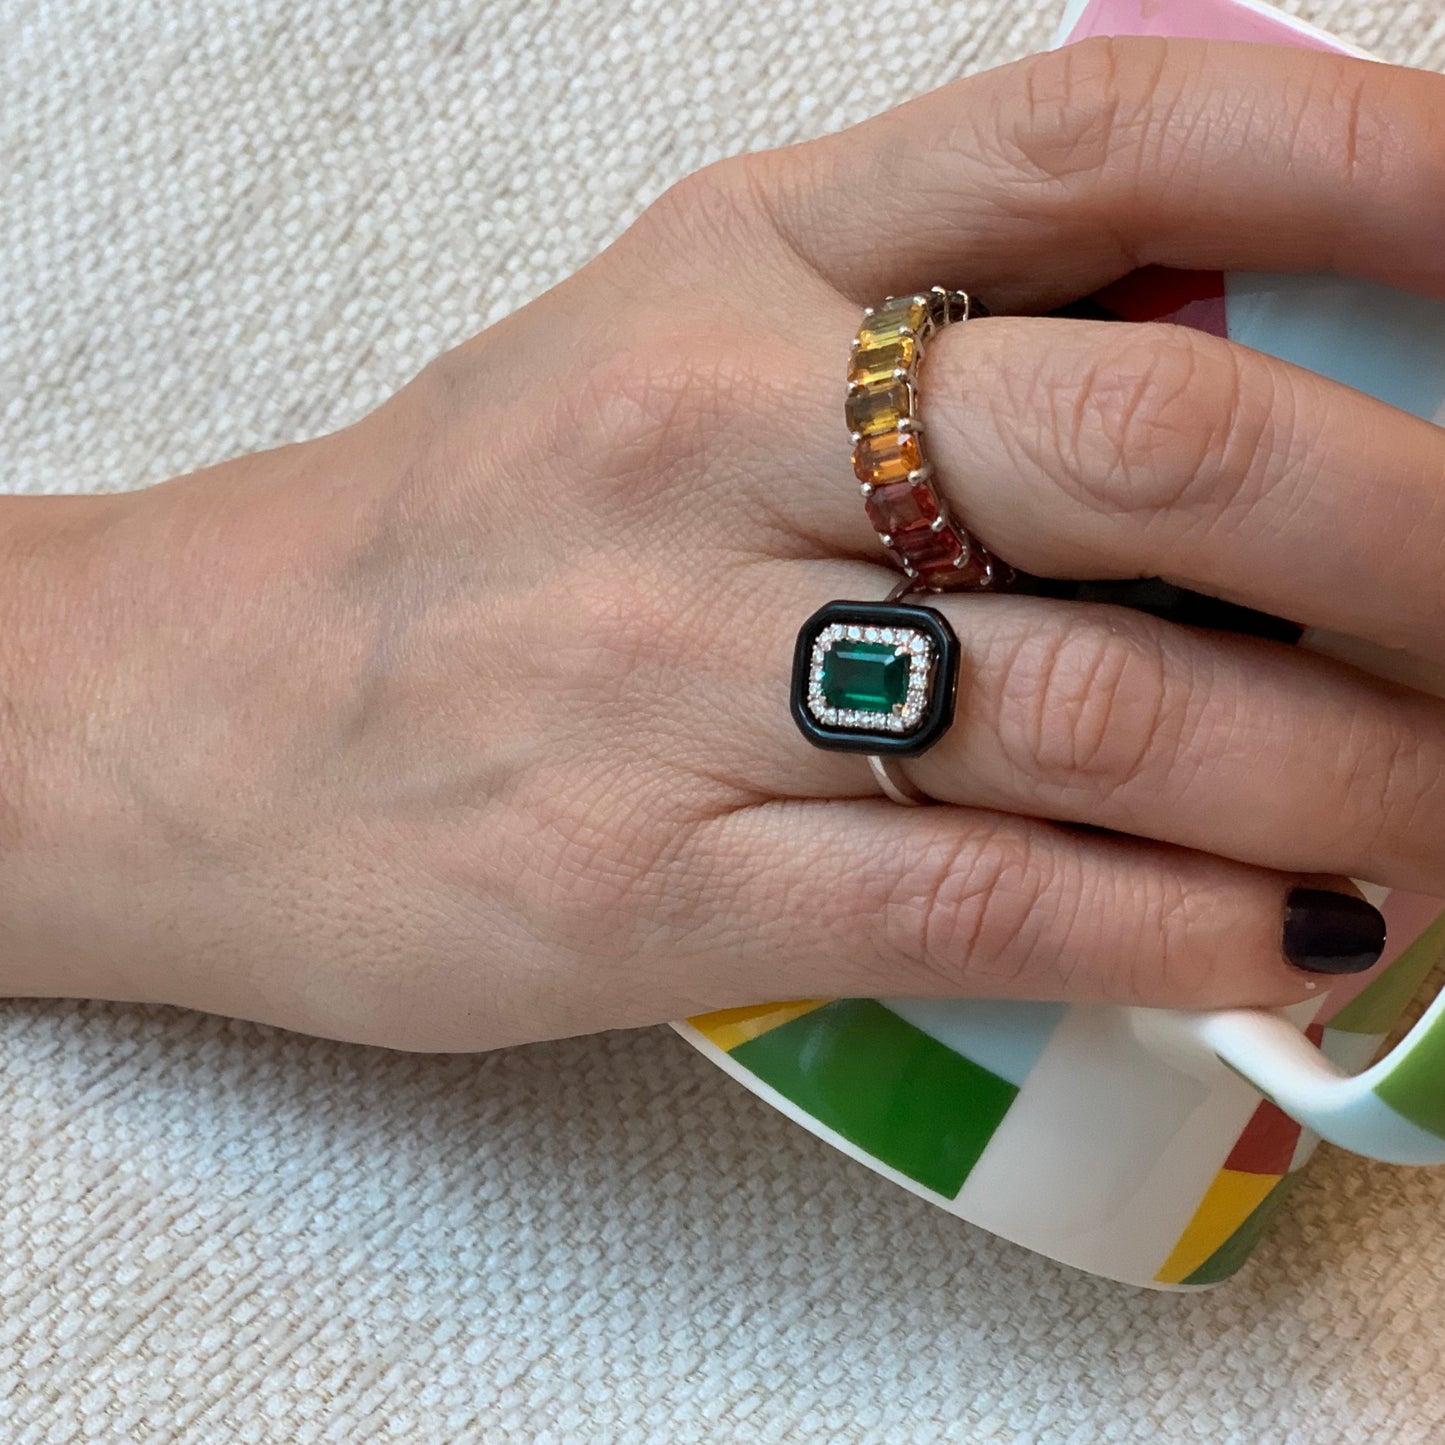 Emerald and Enamel Ring